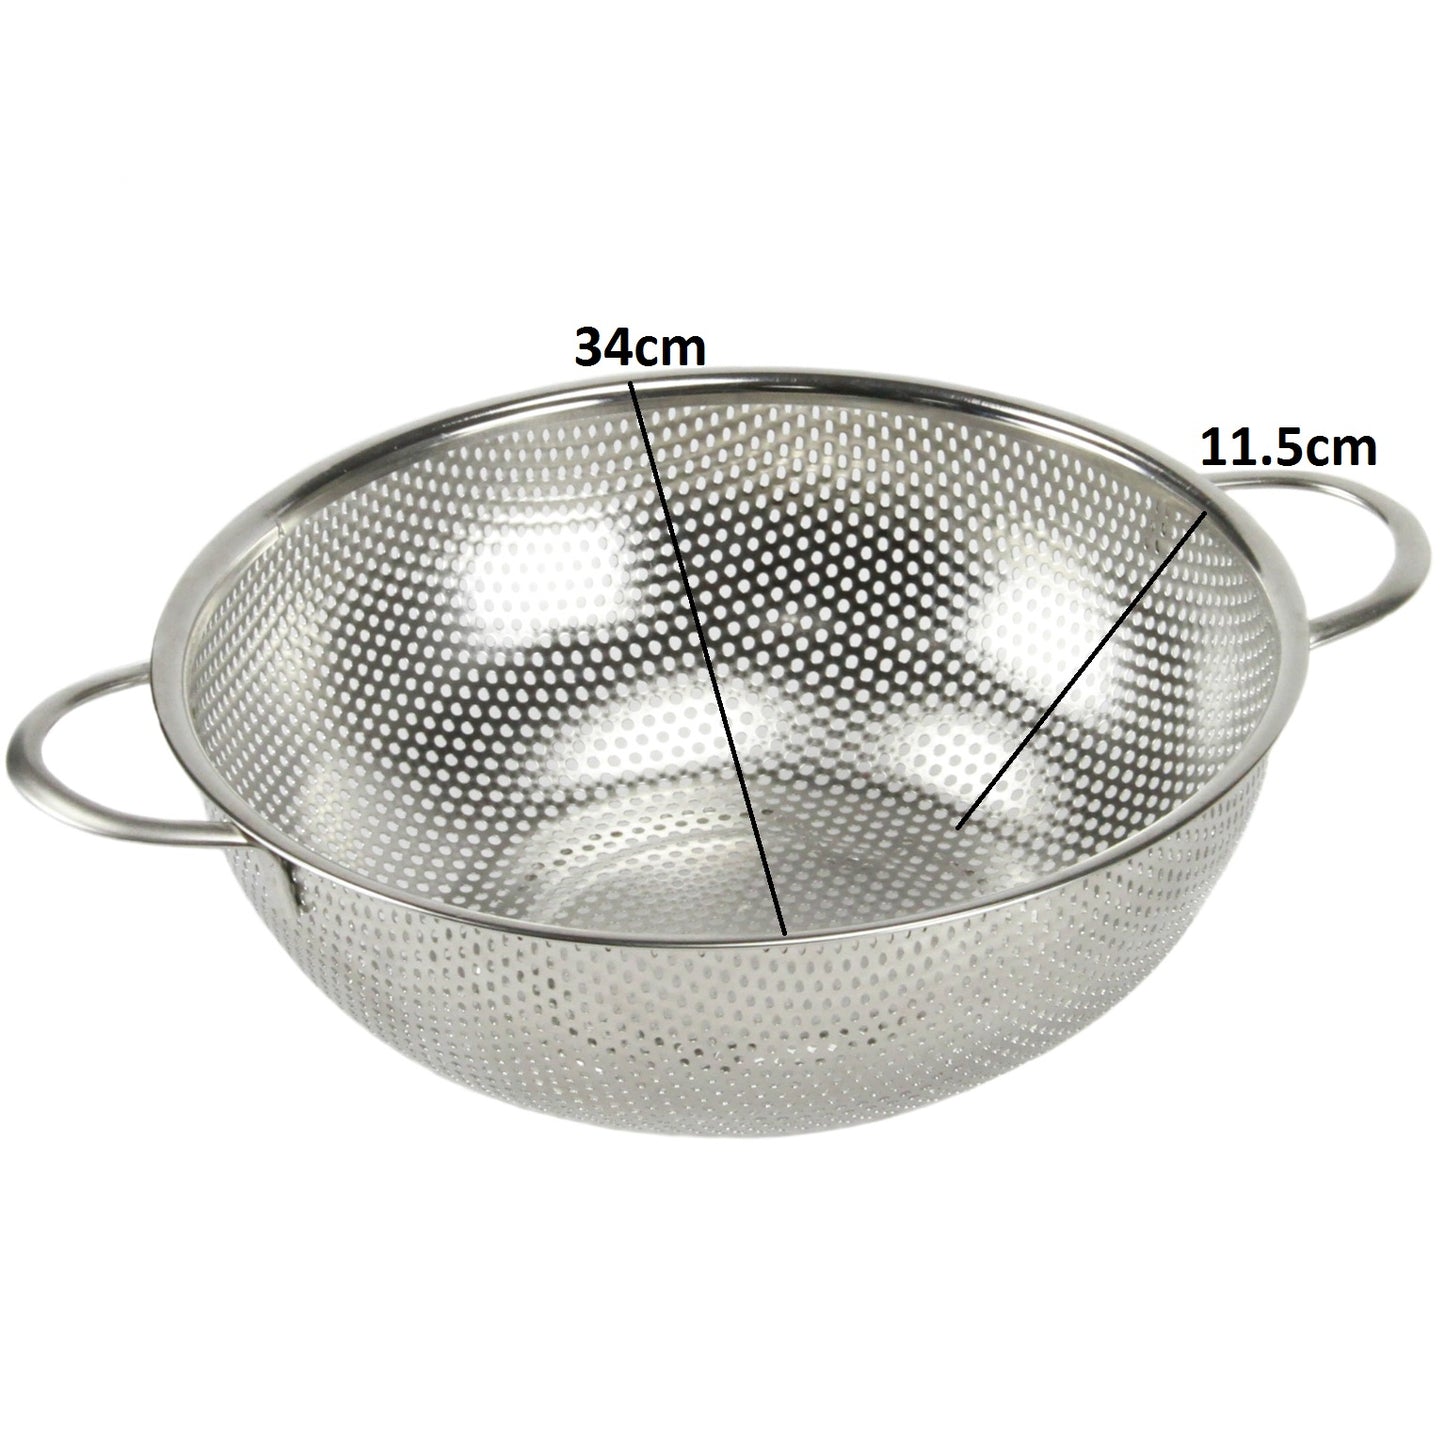 34CM Vegetable Strainer Bowl Stainless Steel with Handles